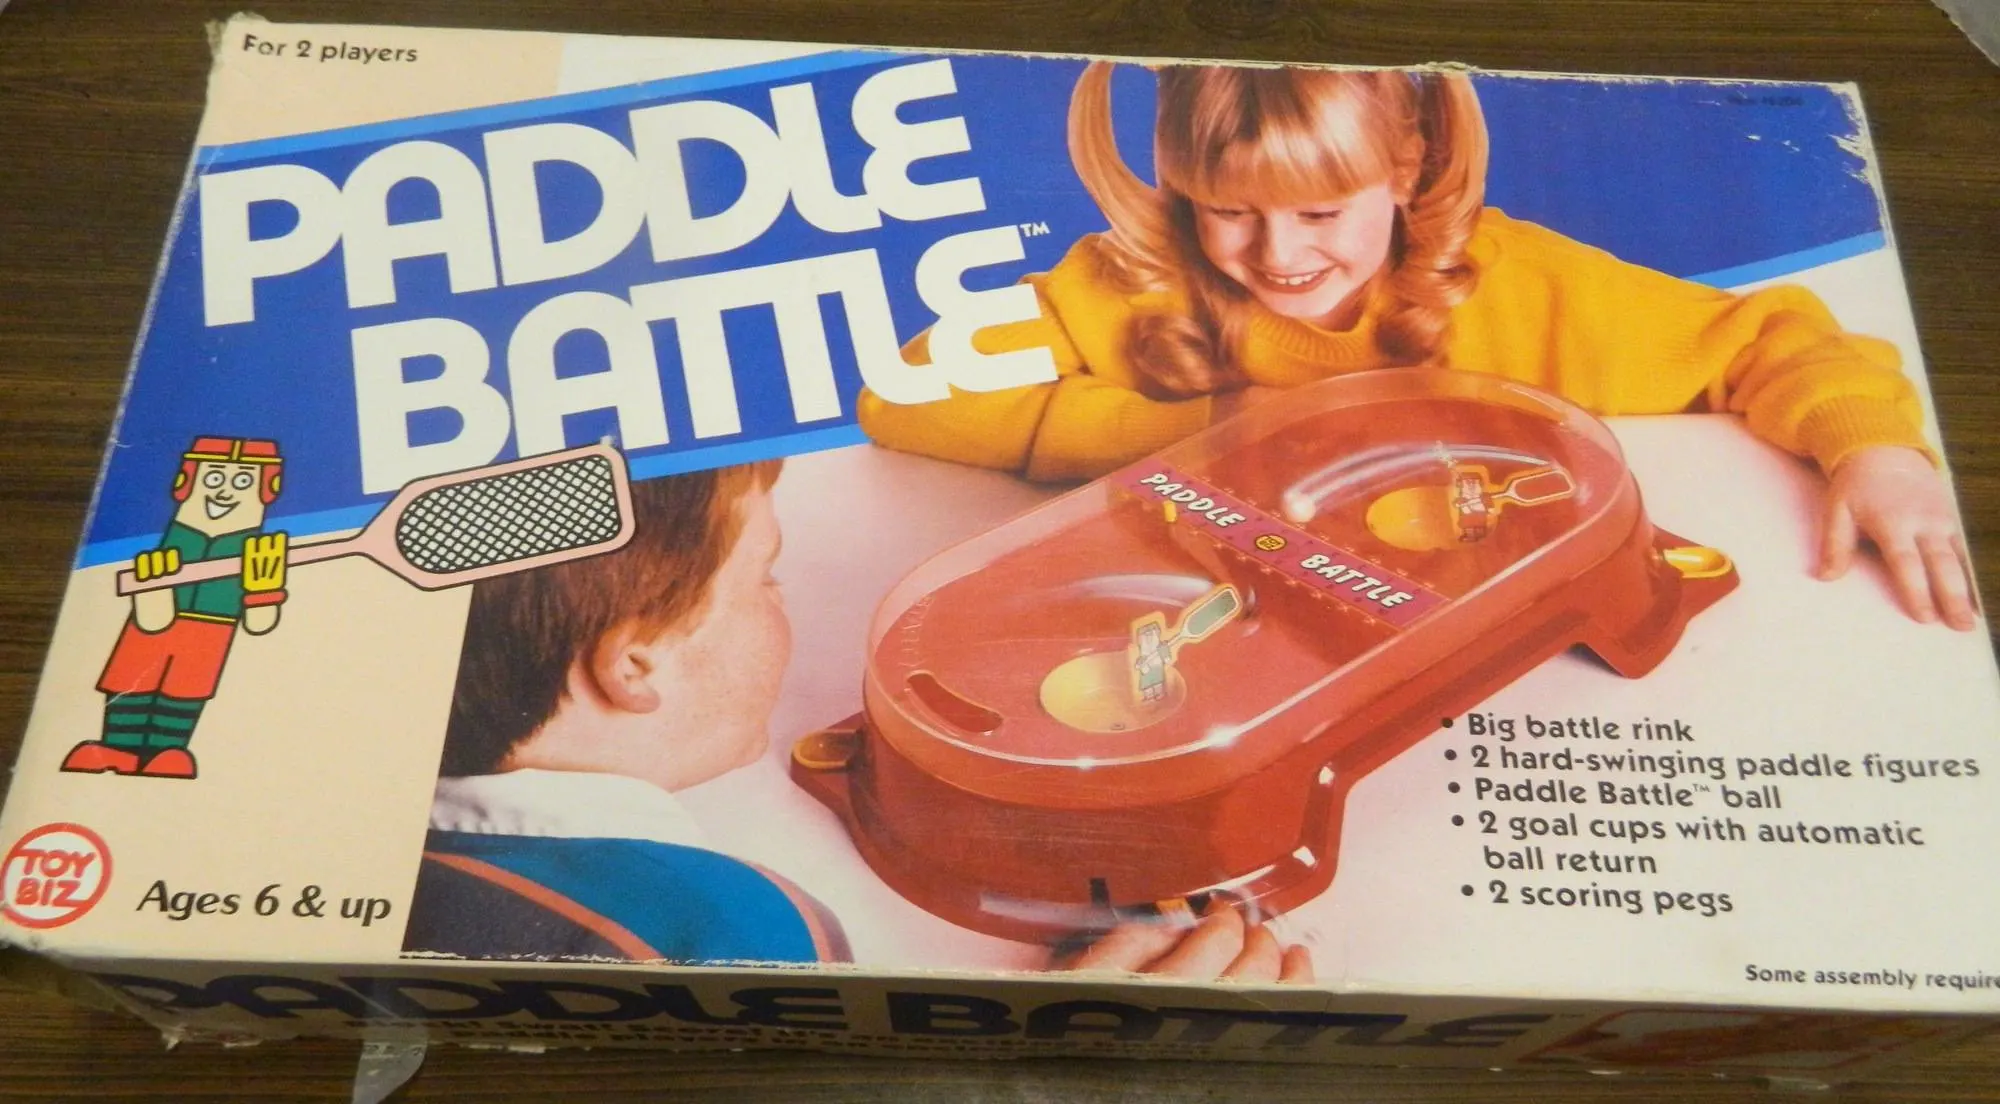 Box for Paddle Battle